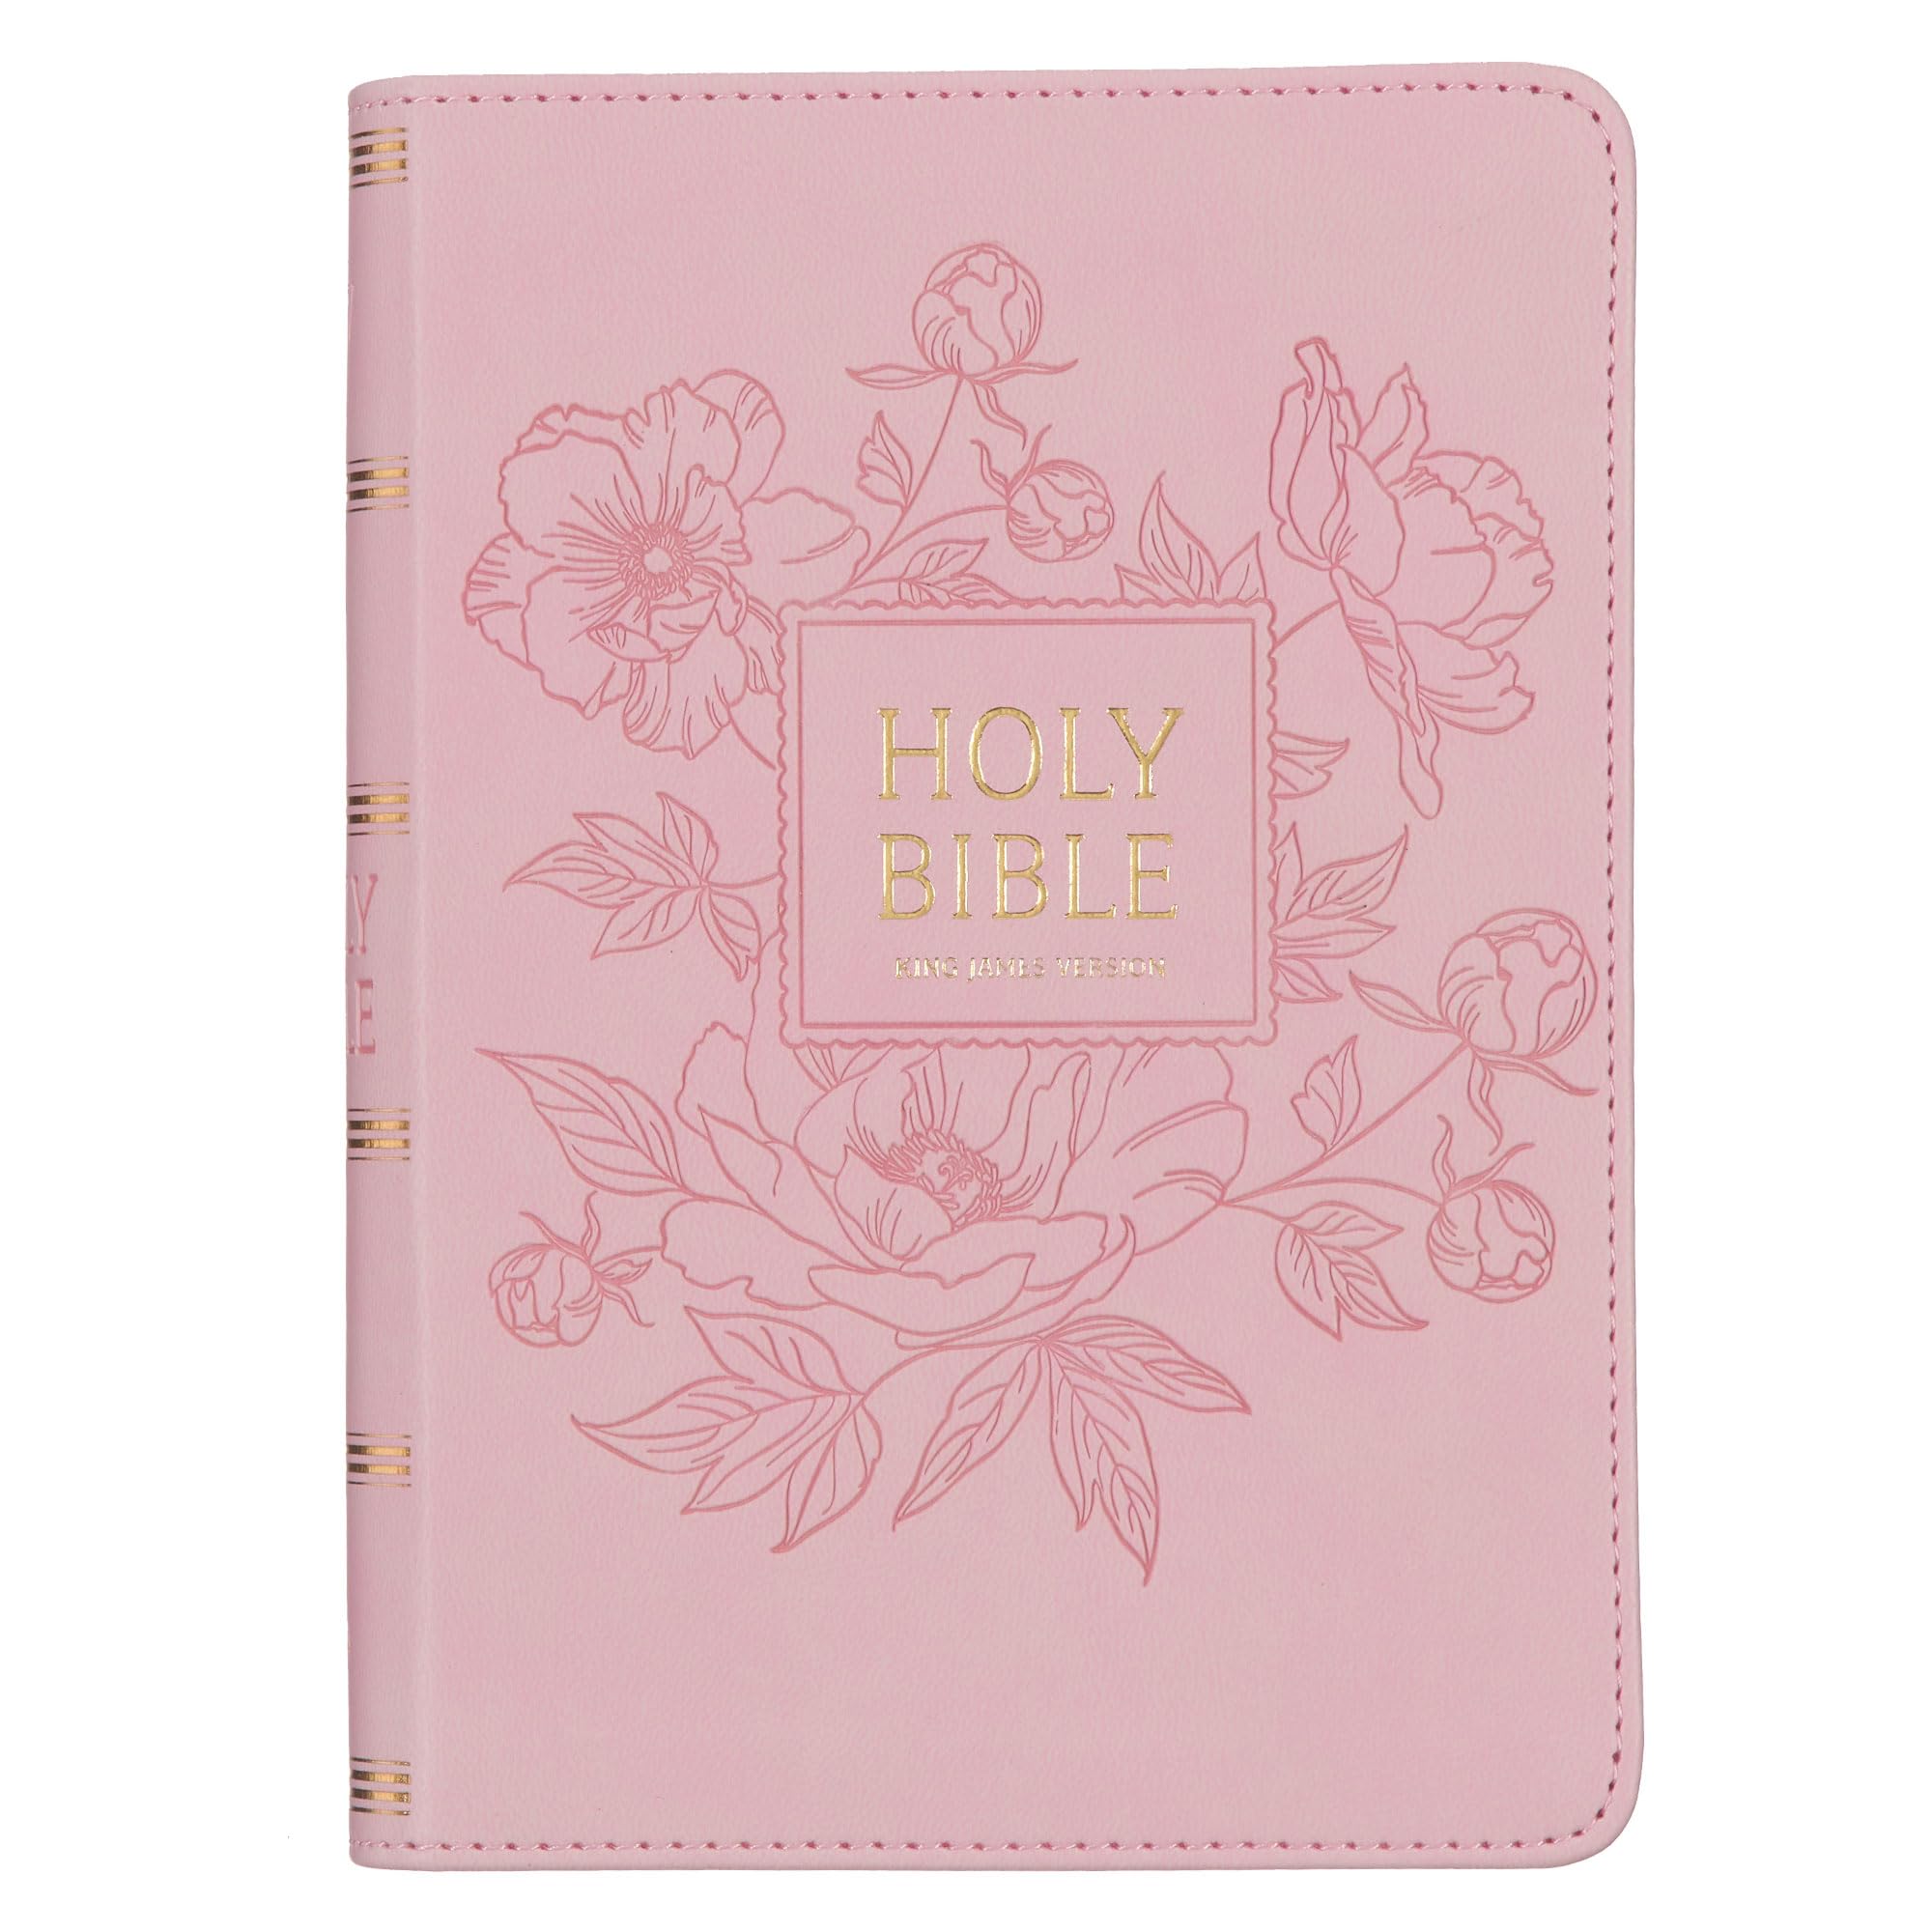 KJV Holy Bible, Compact Large Print Faux Leather Red Letter Edition - Ribbon Marker, King James Version, Pink